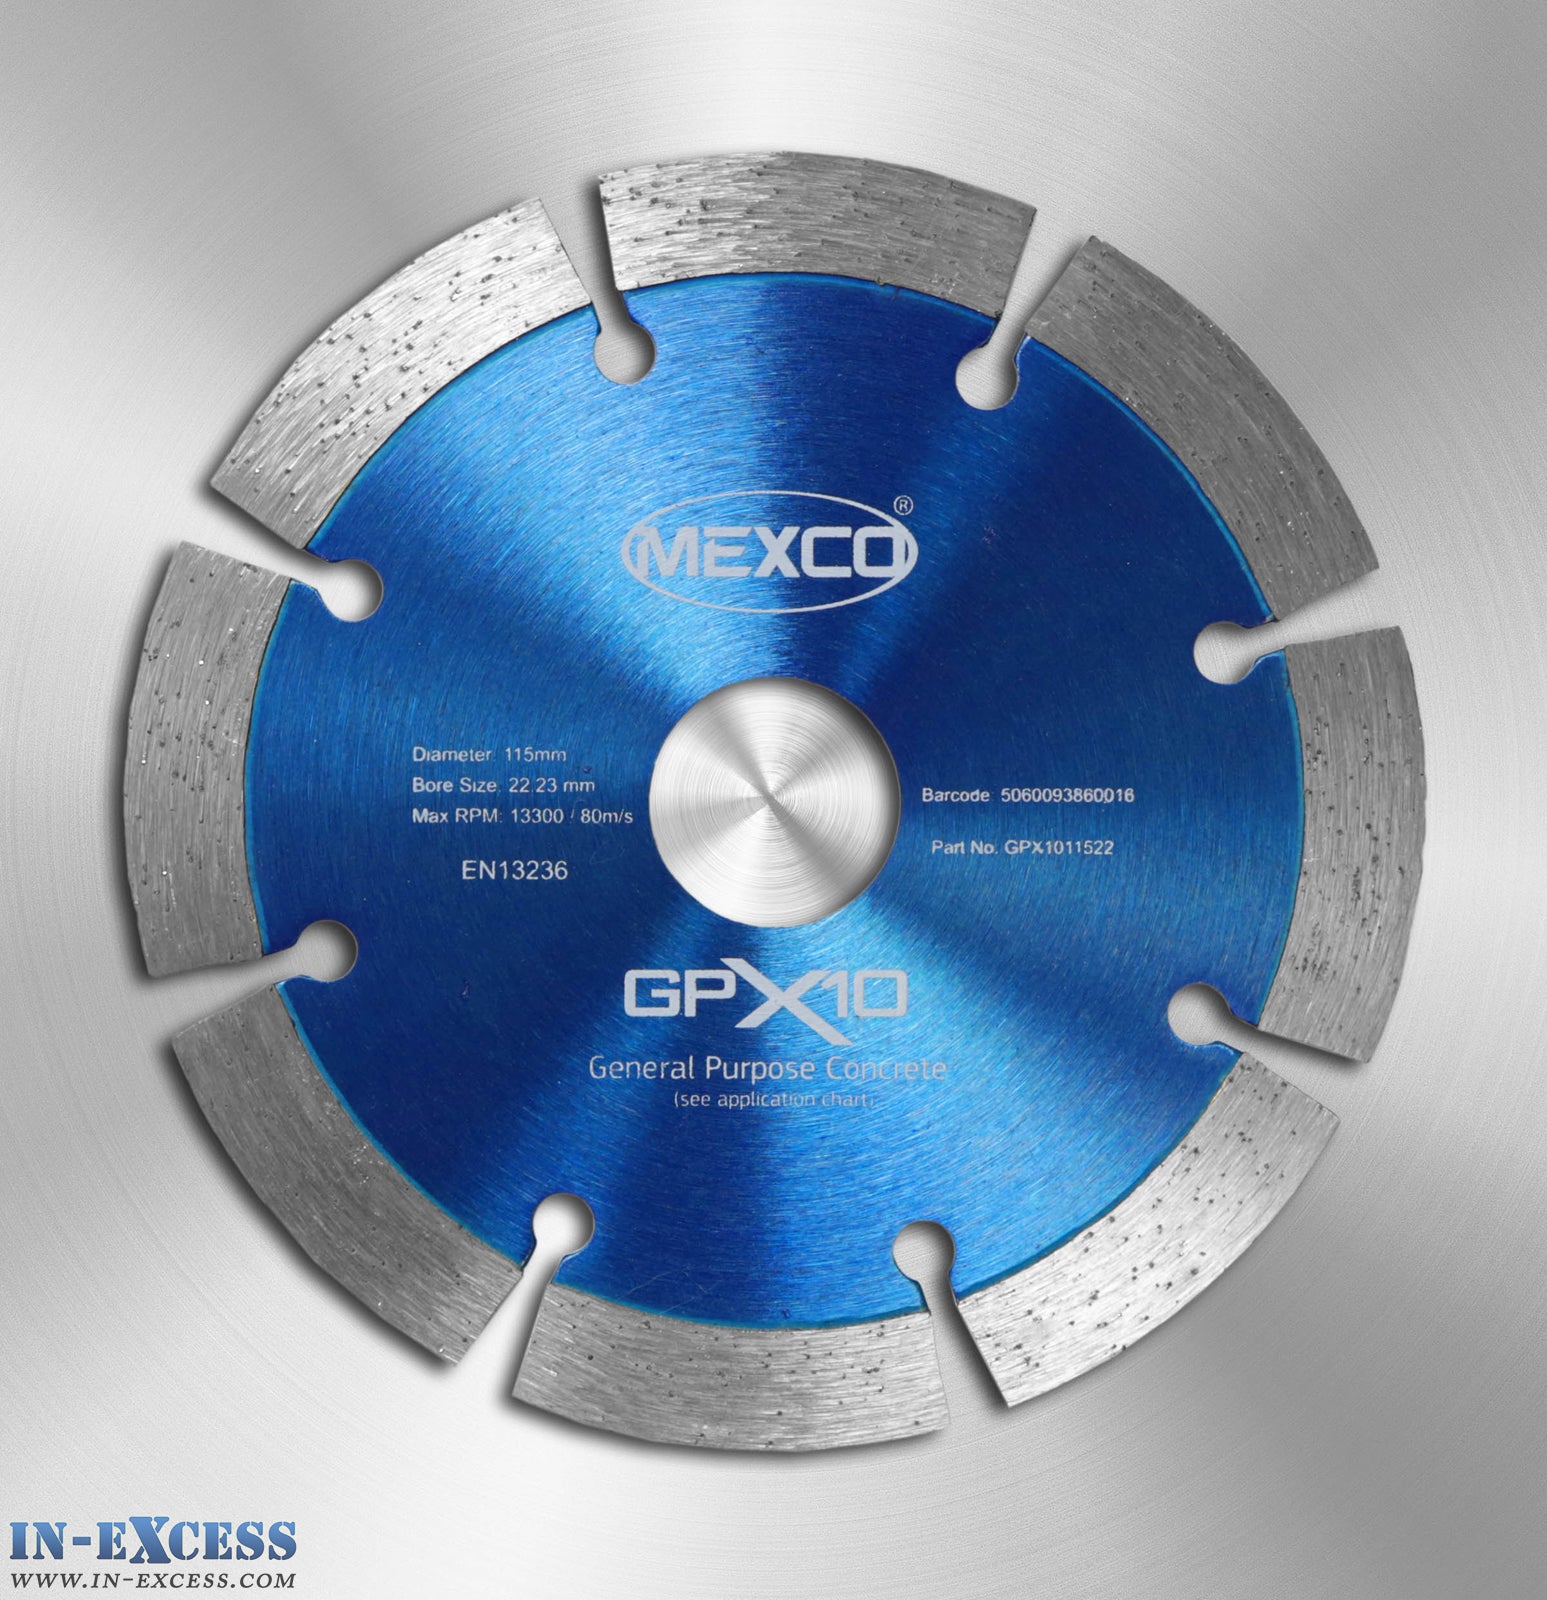 Mexco Professional GPX10 Diamond Cutting Disc for Concrete 115mm